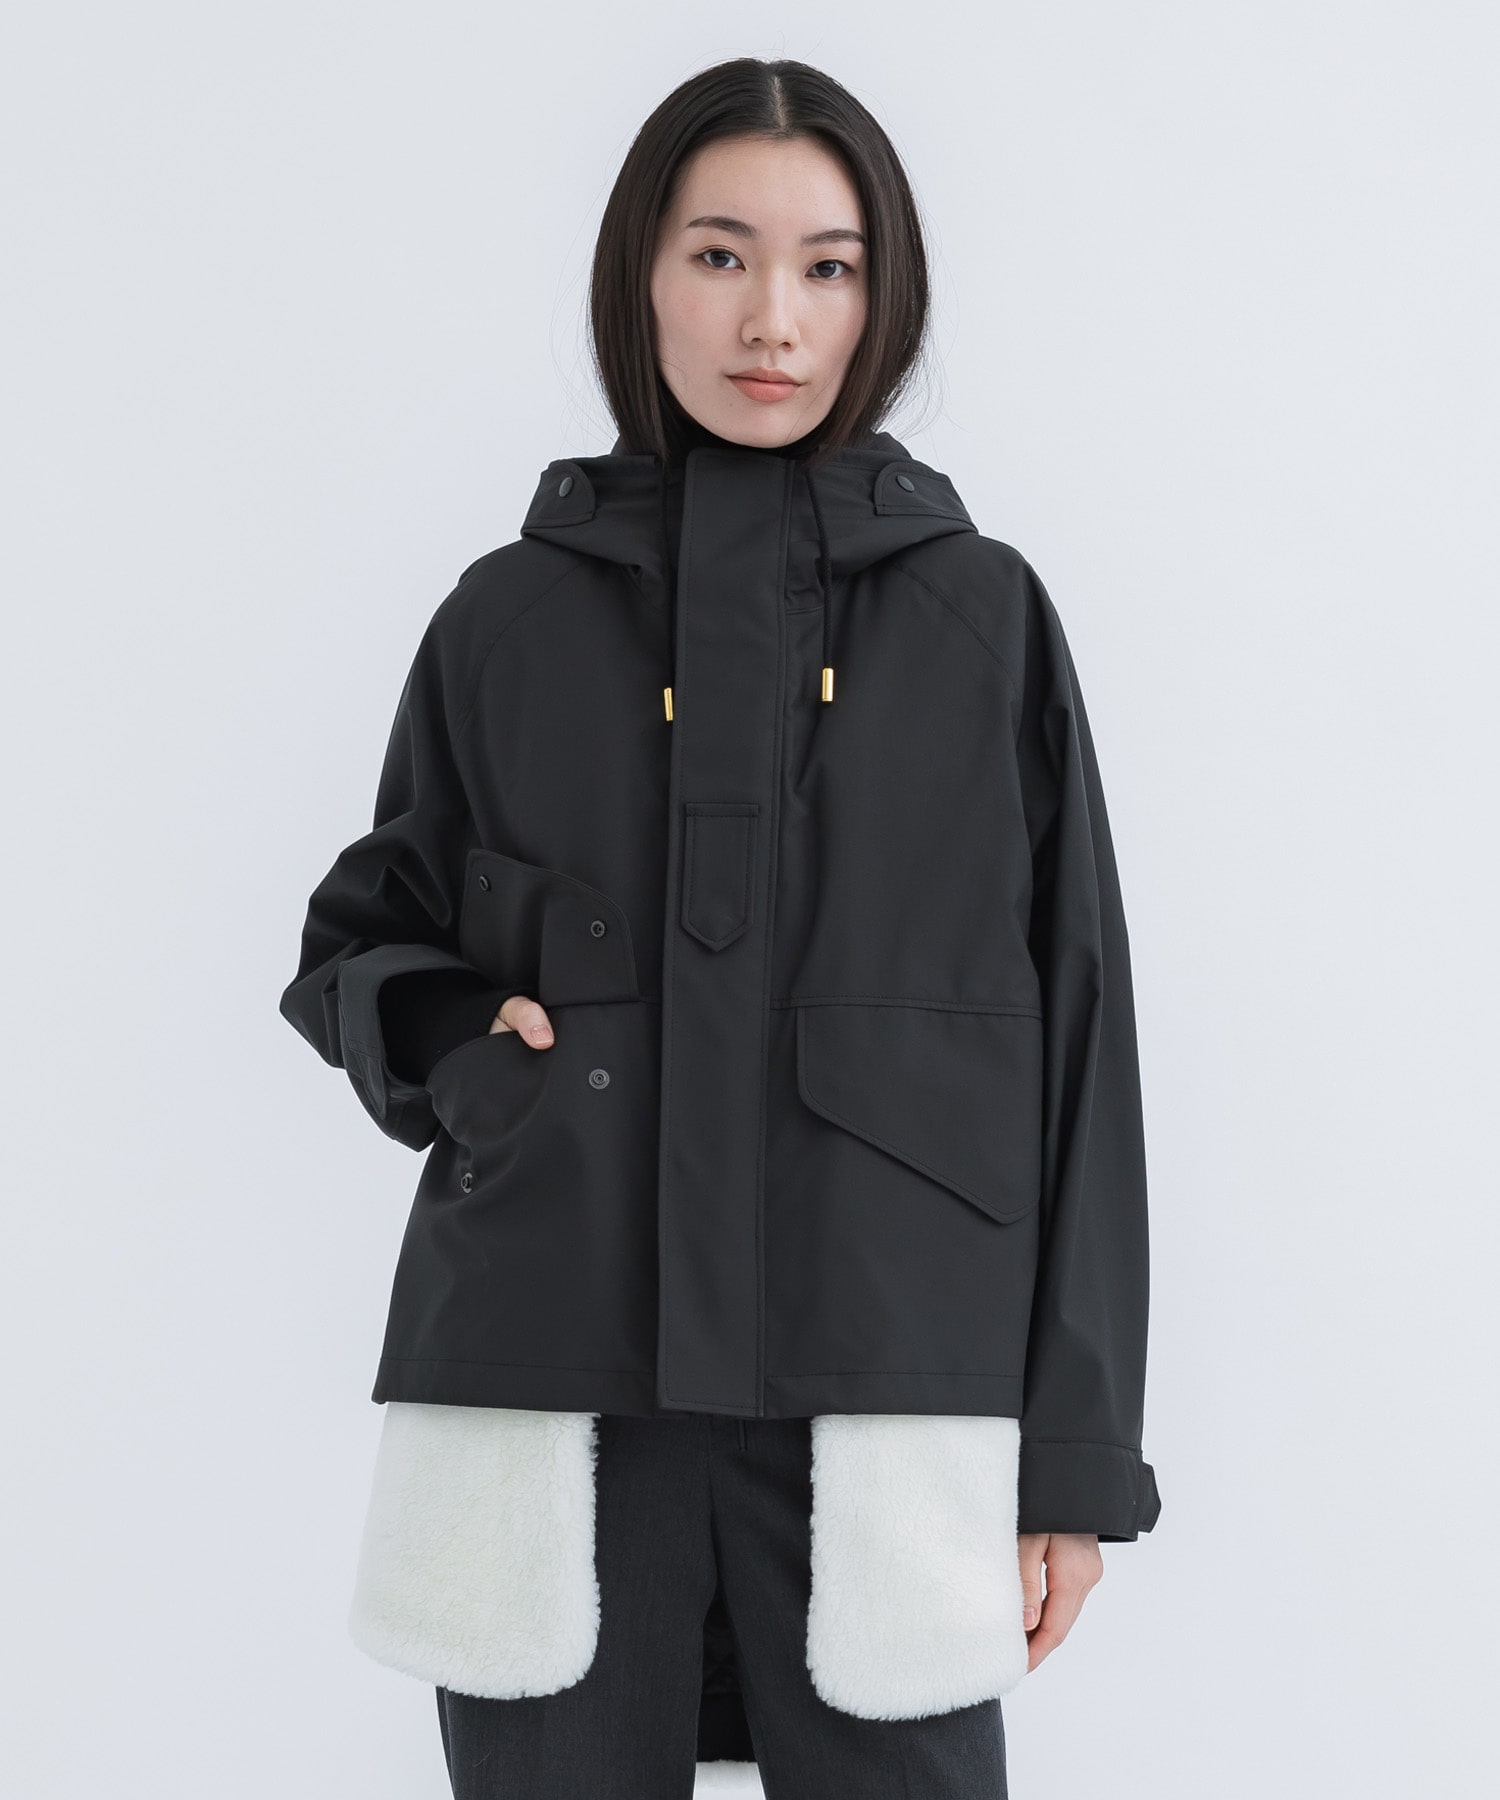 RERACS ECWCS FIELD JACKET WITH LINER(38 BLACK): THE RERACS